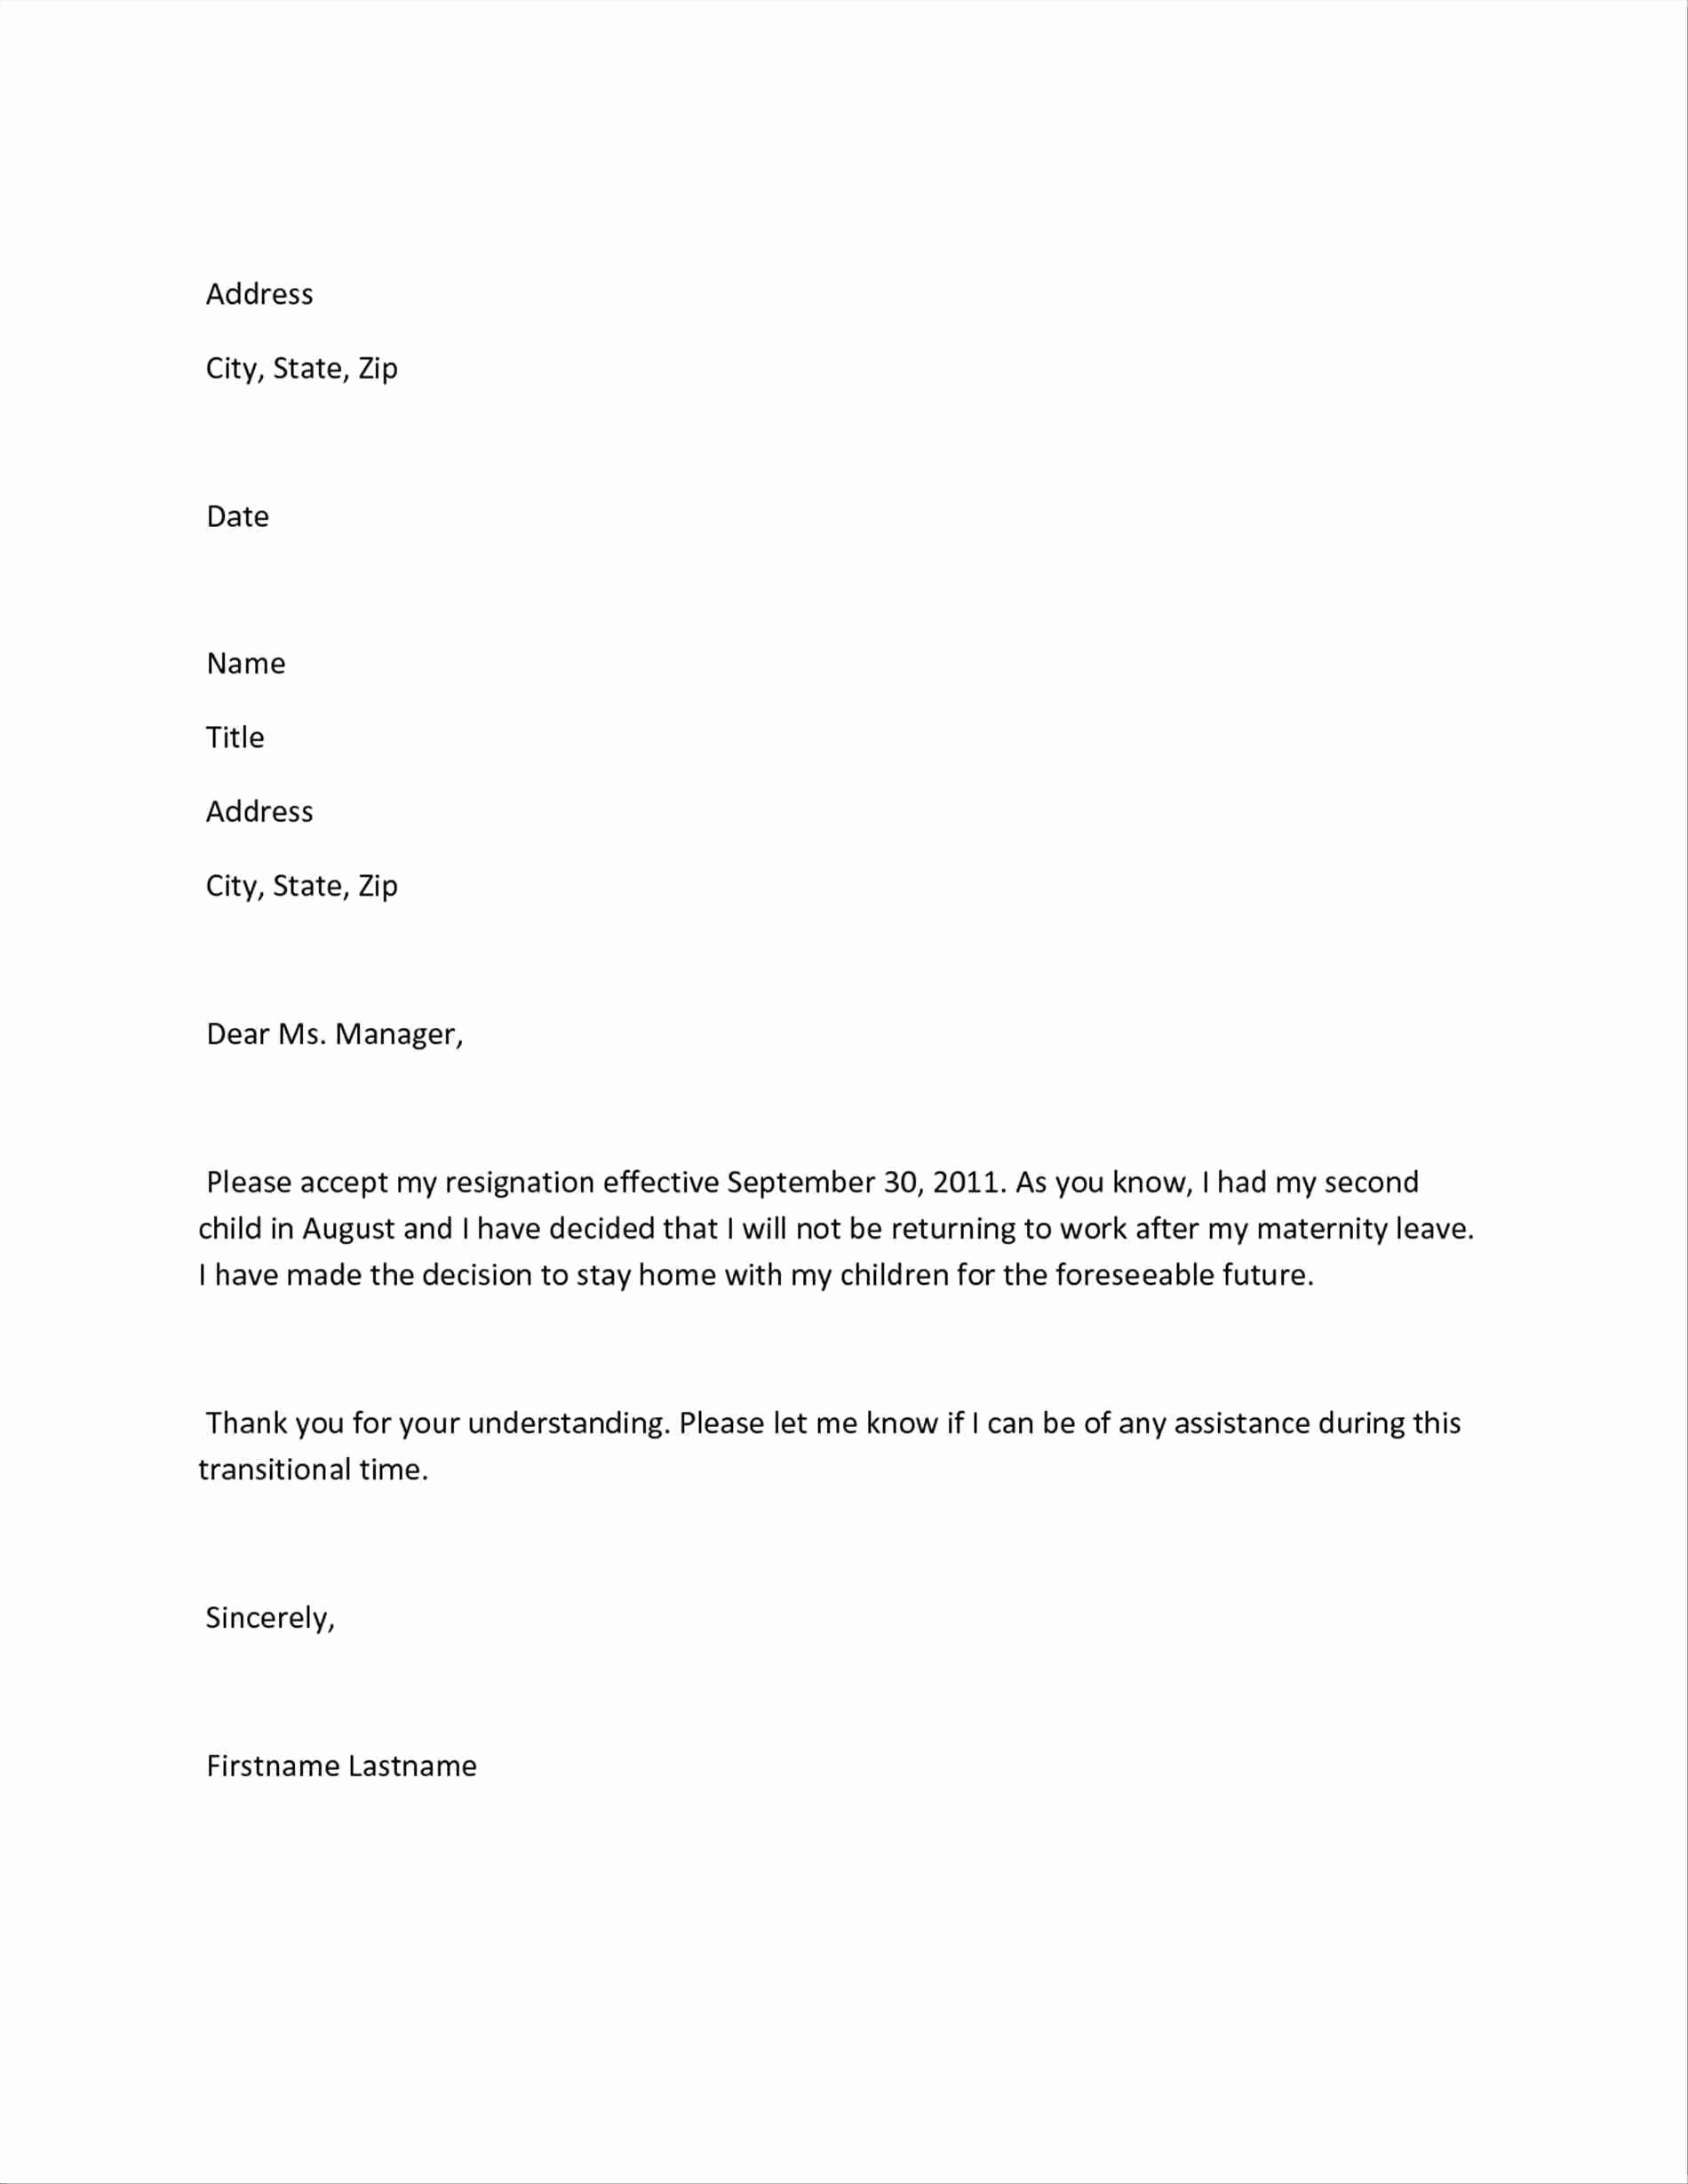 Return to Work Note Template Awesome Maternity Return to Work Letter From Employer Template